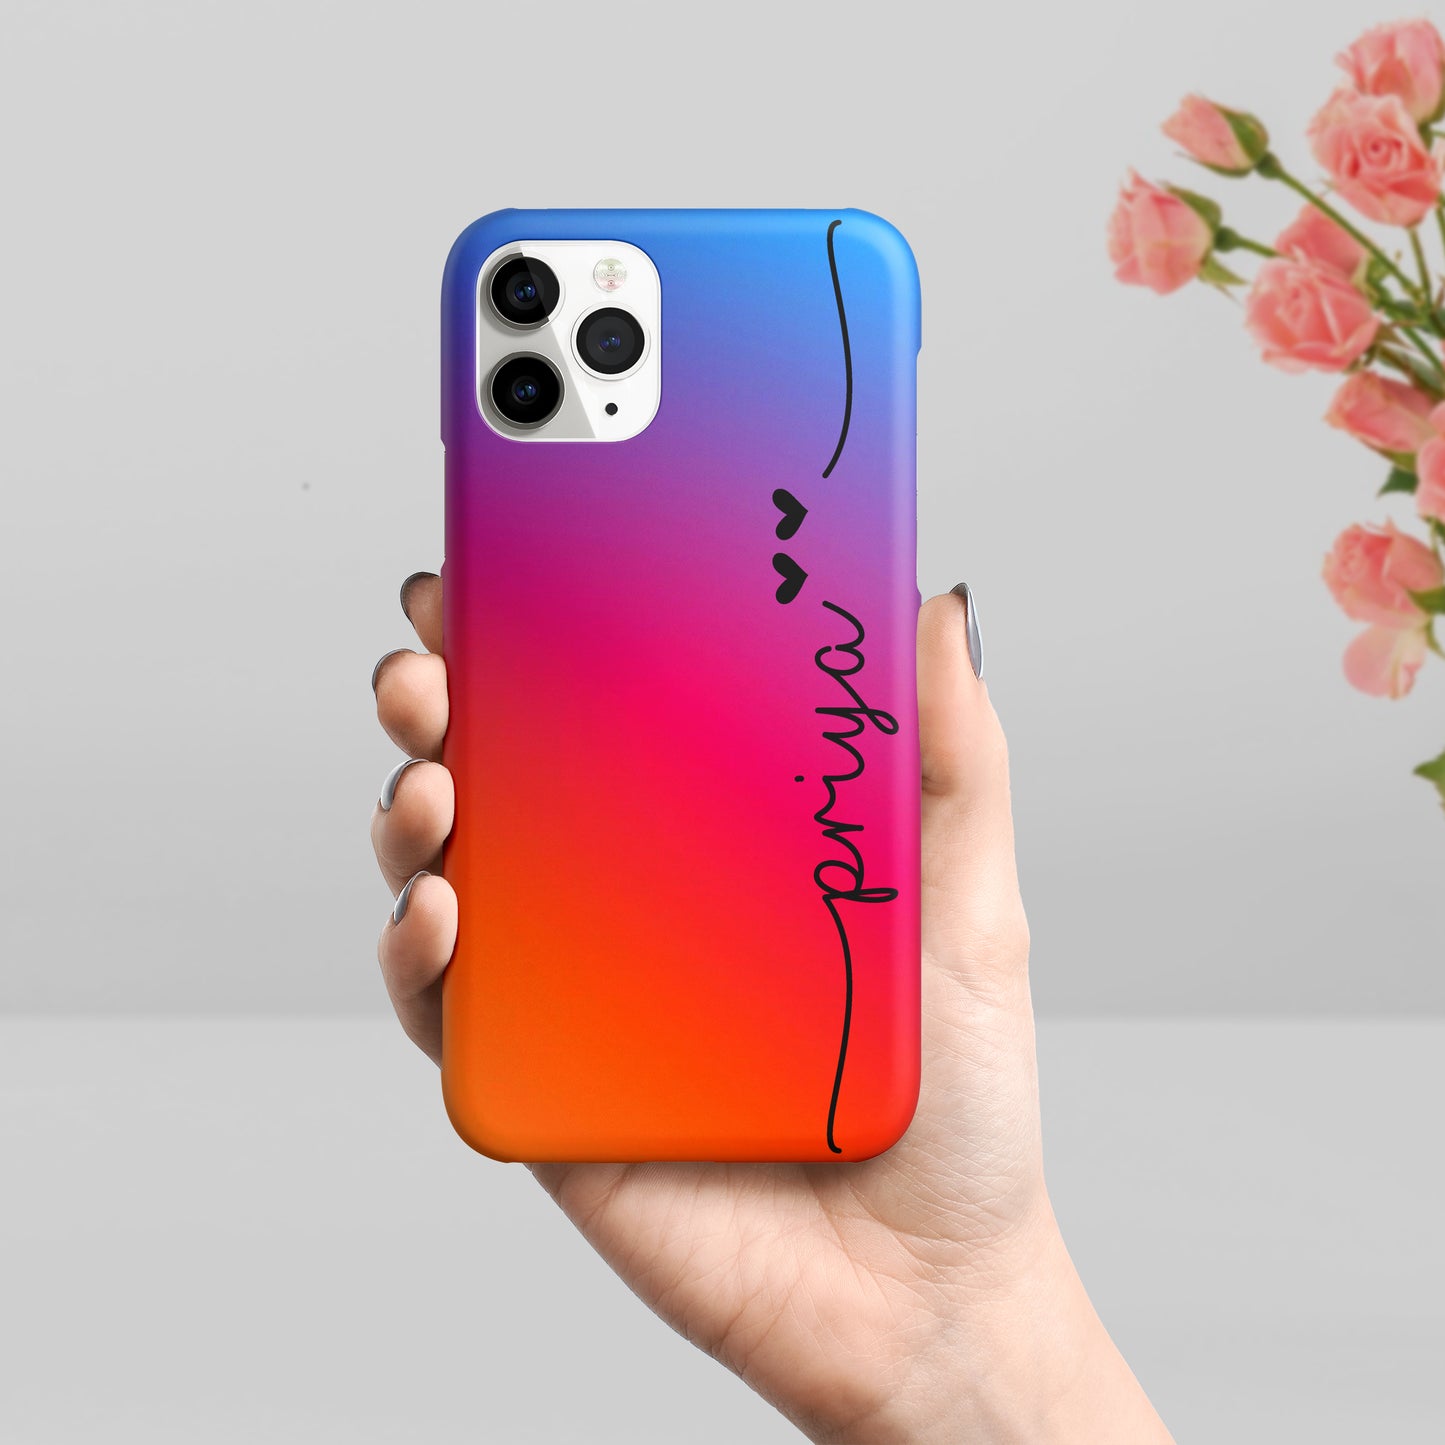 Rainbow Design Slim Phone Case Cover With Customized Name